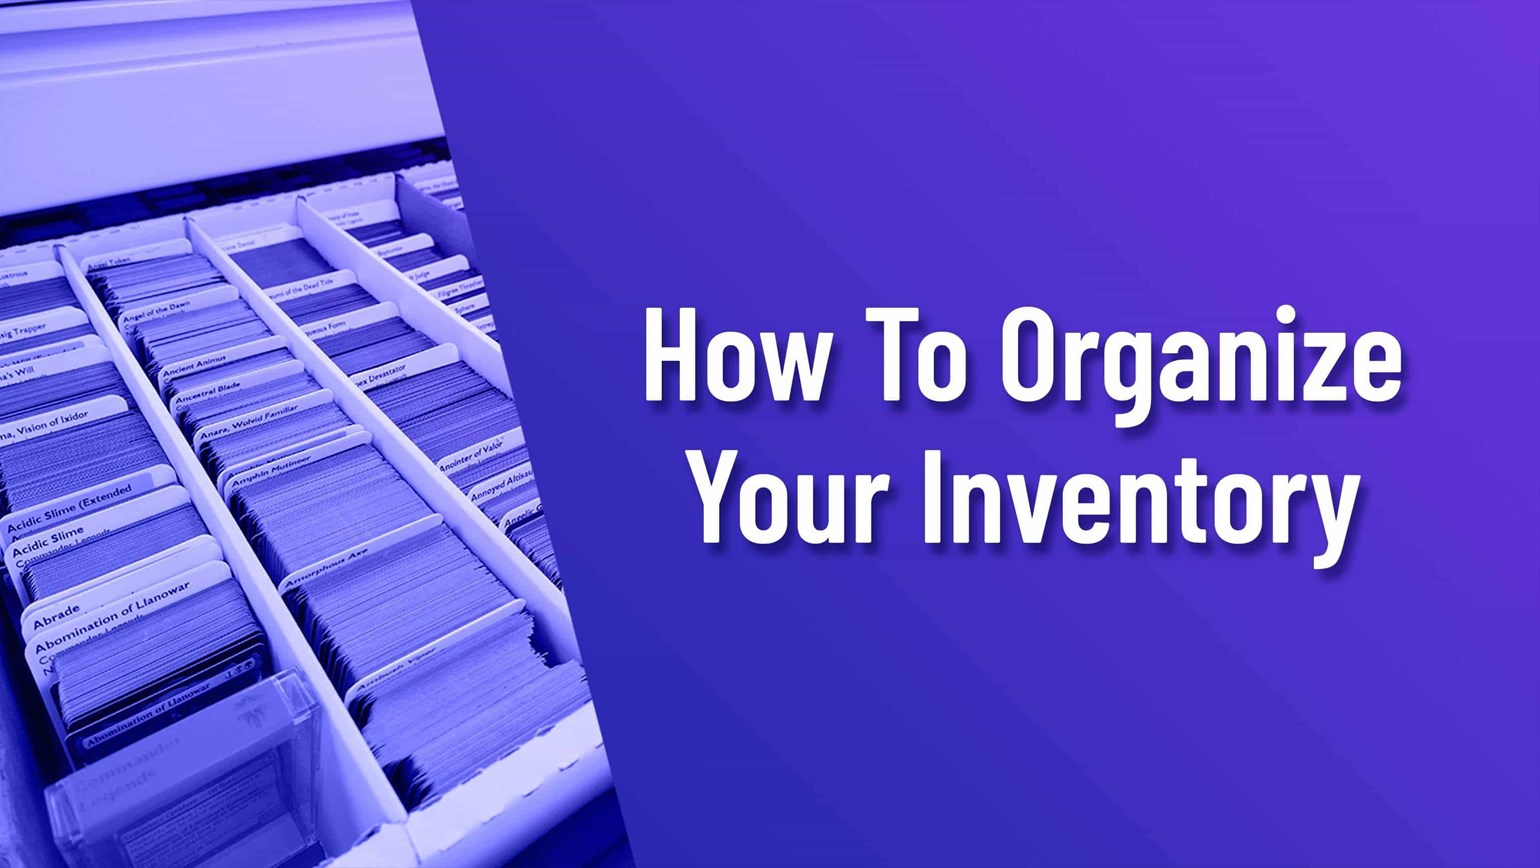 Tips for Organizing Your Inventory